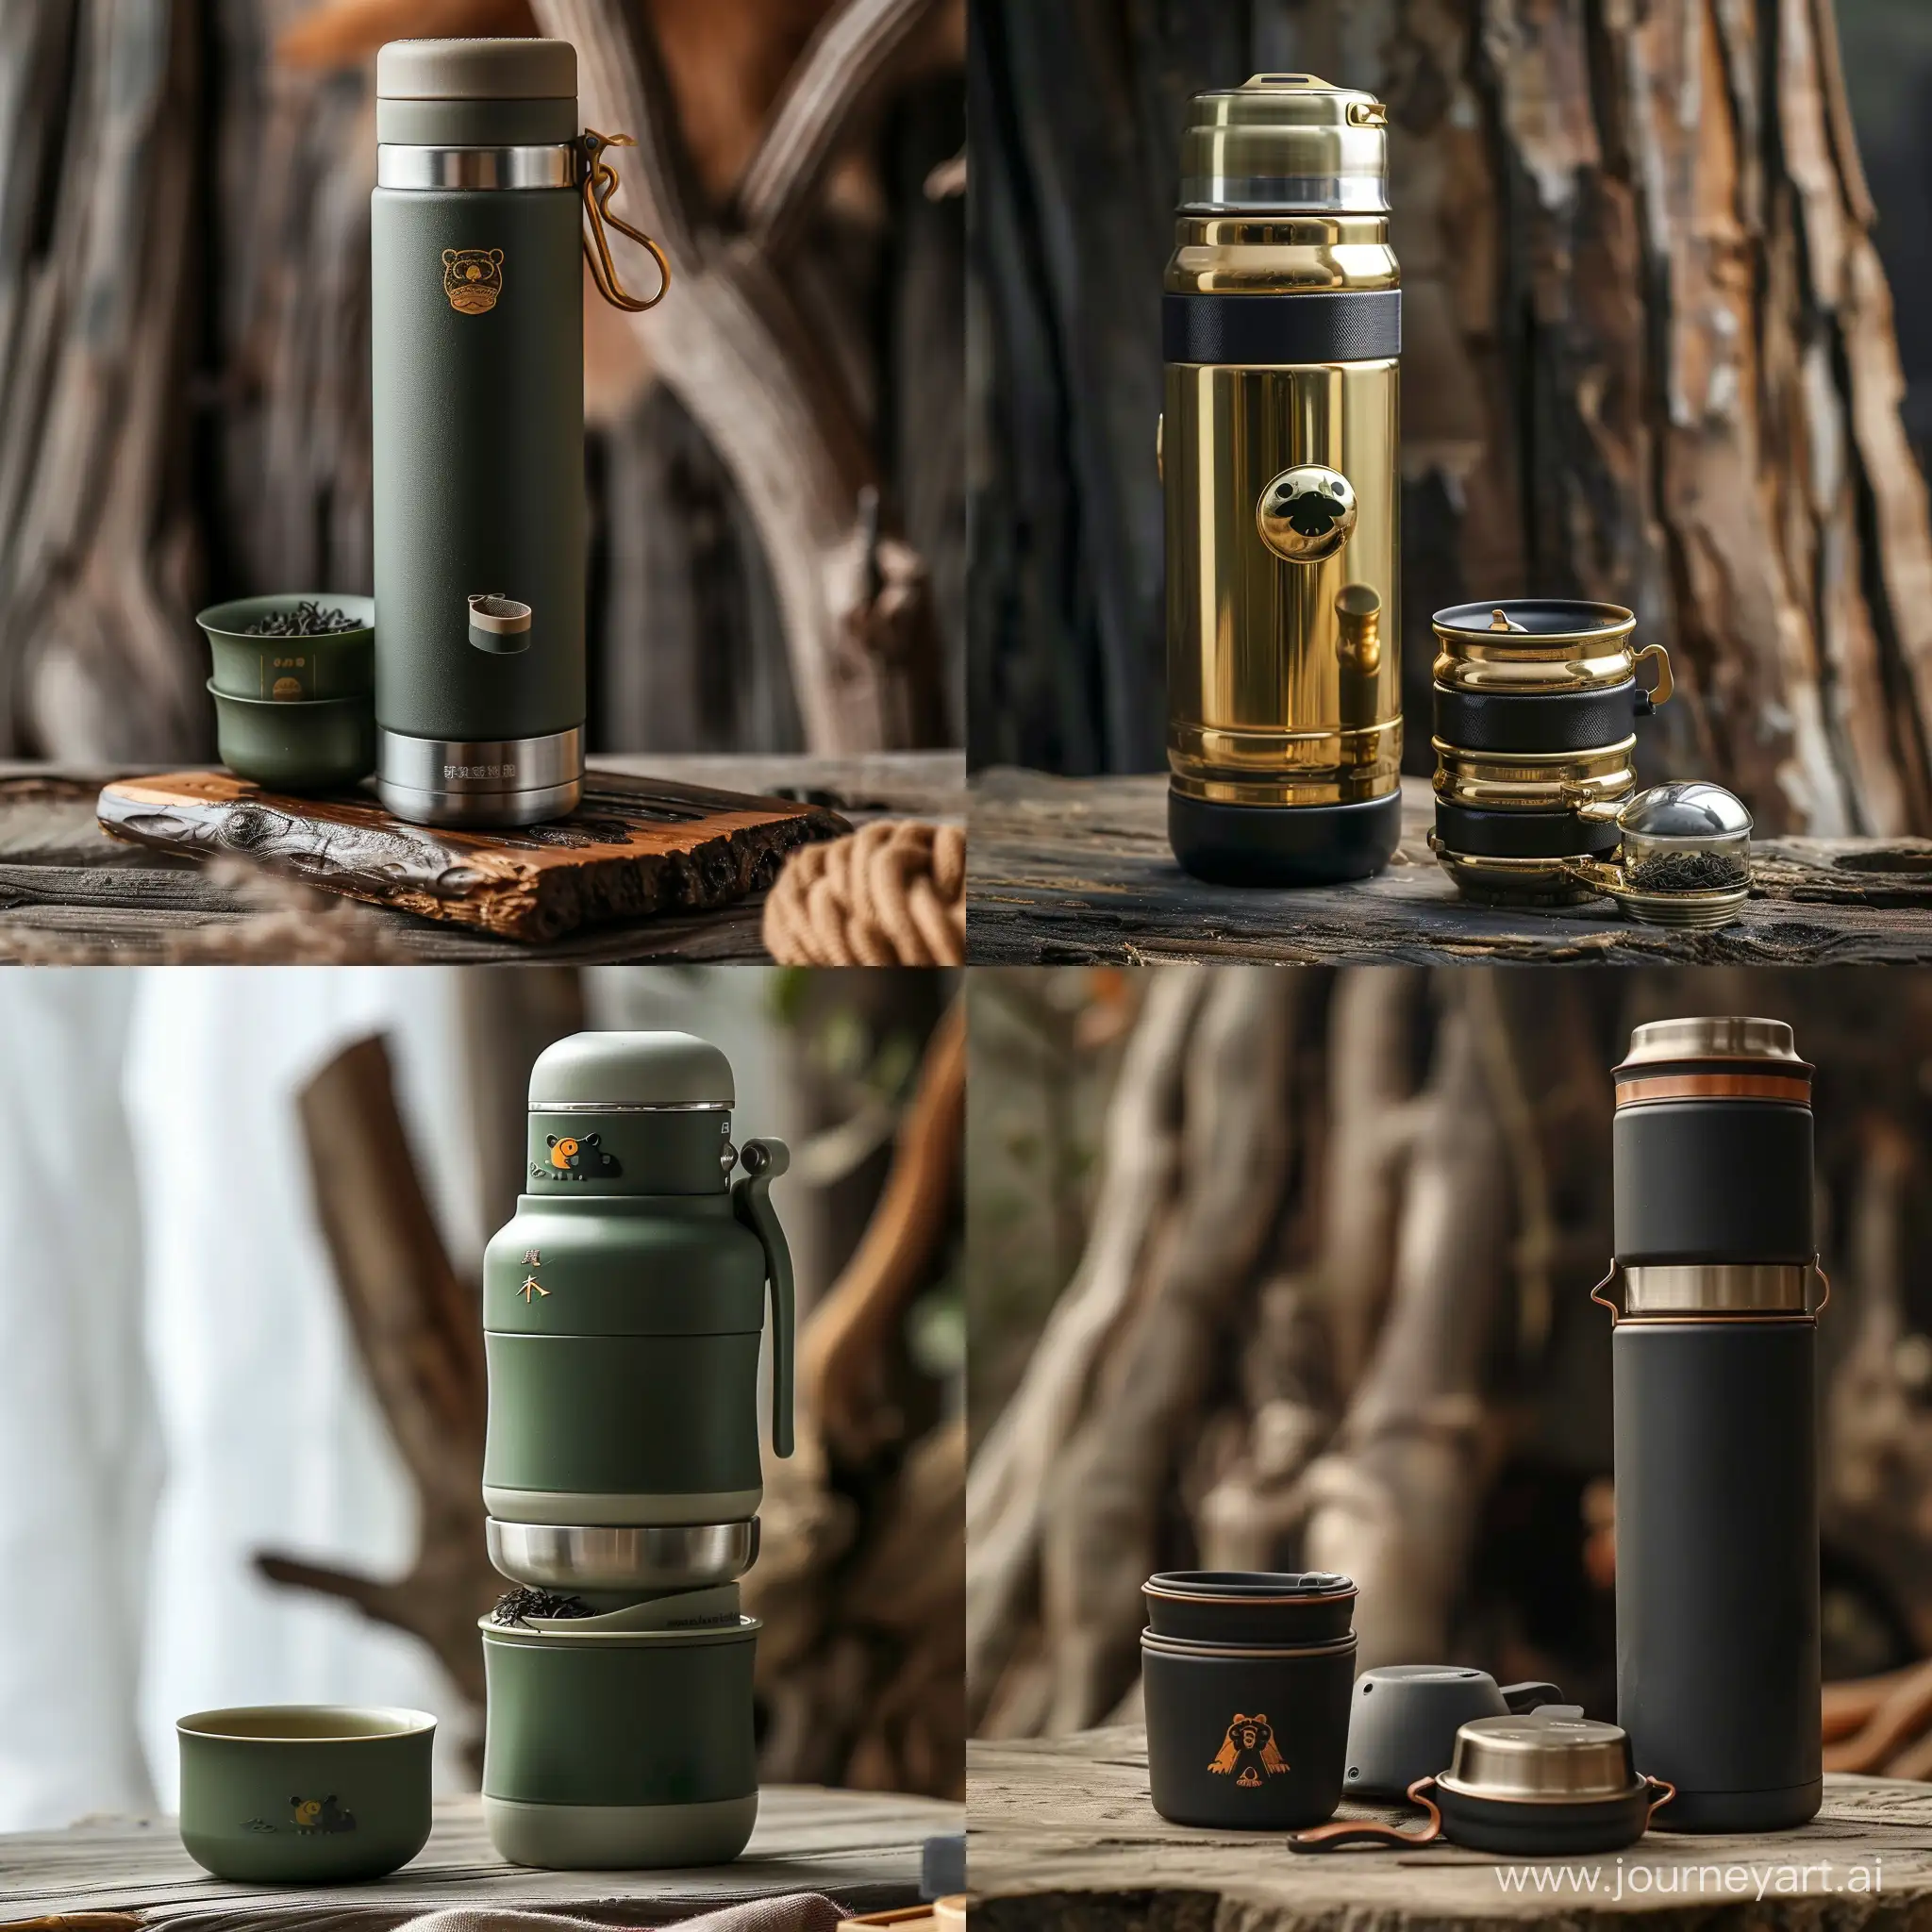 Dimensions is Height approximately 15cm, Diameter around 8cm, thermos bottle and tea cup material will made of Stainless steel and PP plastic lid, thermos bottle and cups should be stackable for storage, possibly from the bottom or top, Include a special compartment for storing tea leaves, Implement a camping-style folding handle design, Incorporate the theme of the Taiwanese black bear into the design, particularly on the cup lid